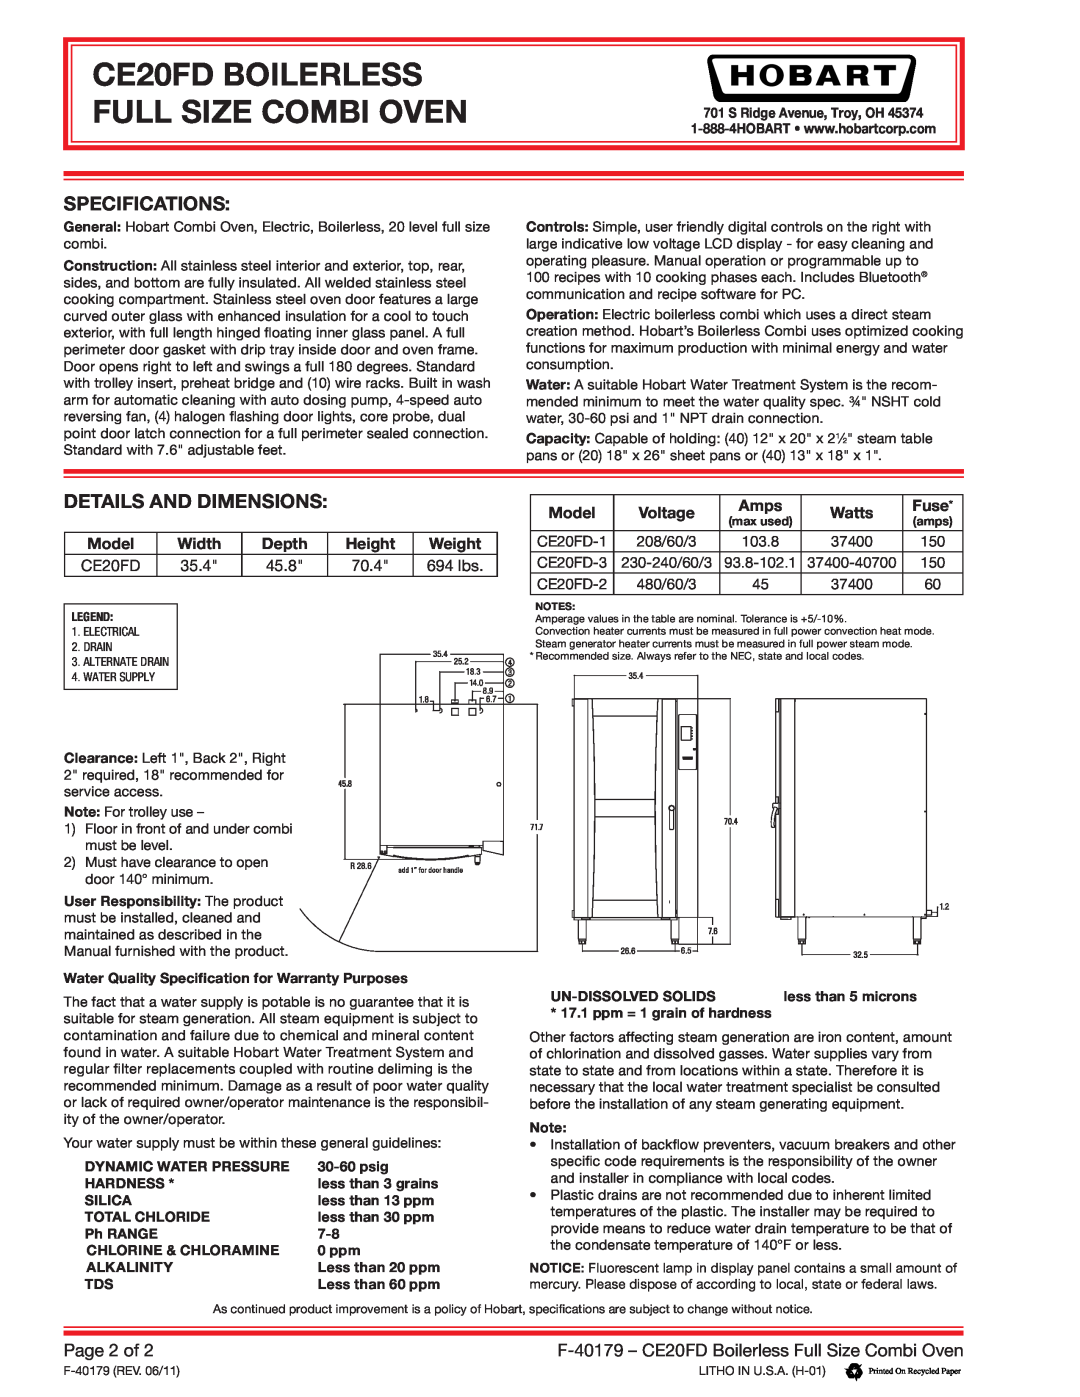 Hobart Specifications, Details And Dimensions, Page 2 of, CE20FD BOILERLESS FULL SIZE COMBI OVEN, Model, Width, Depth 